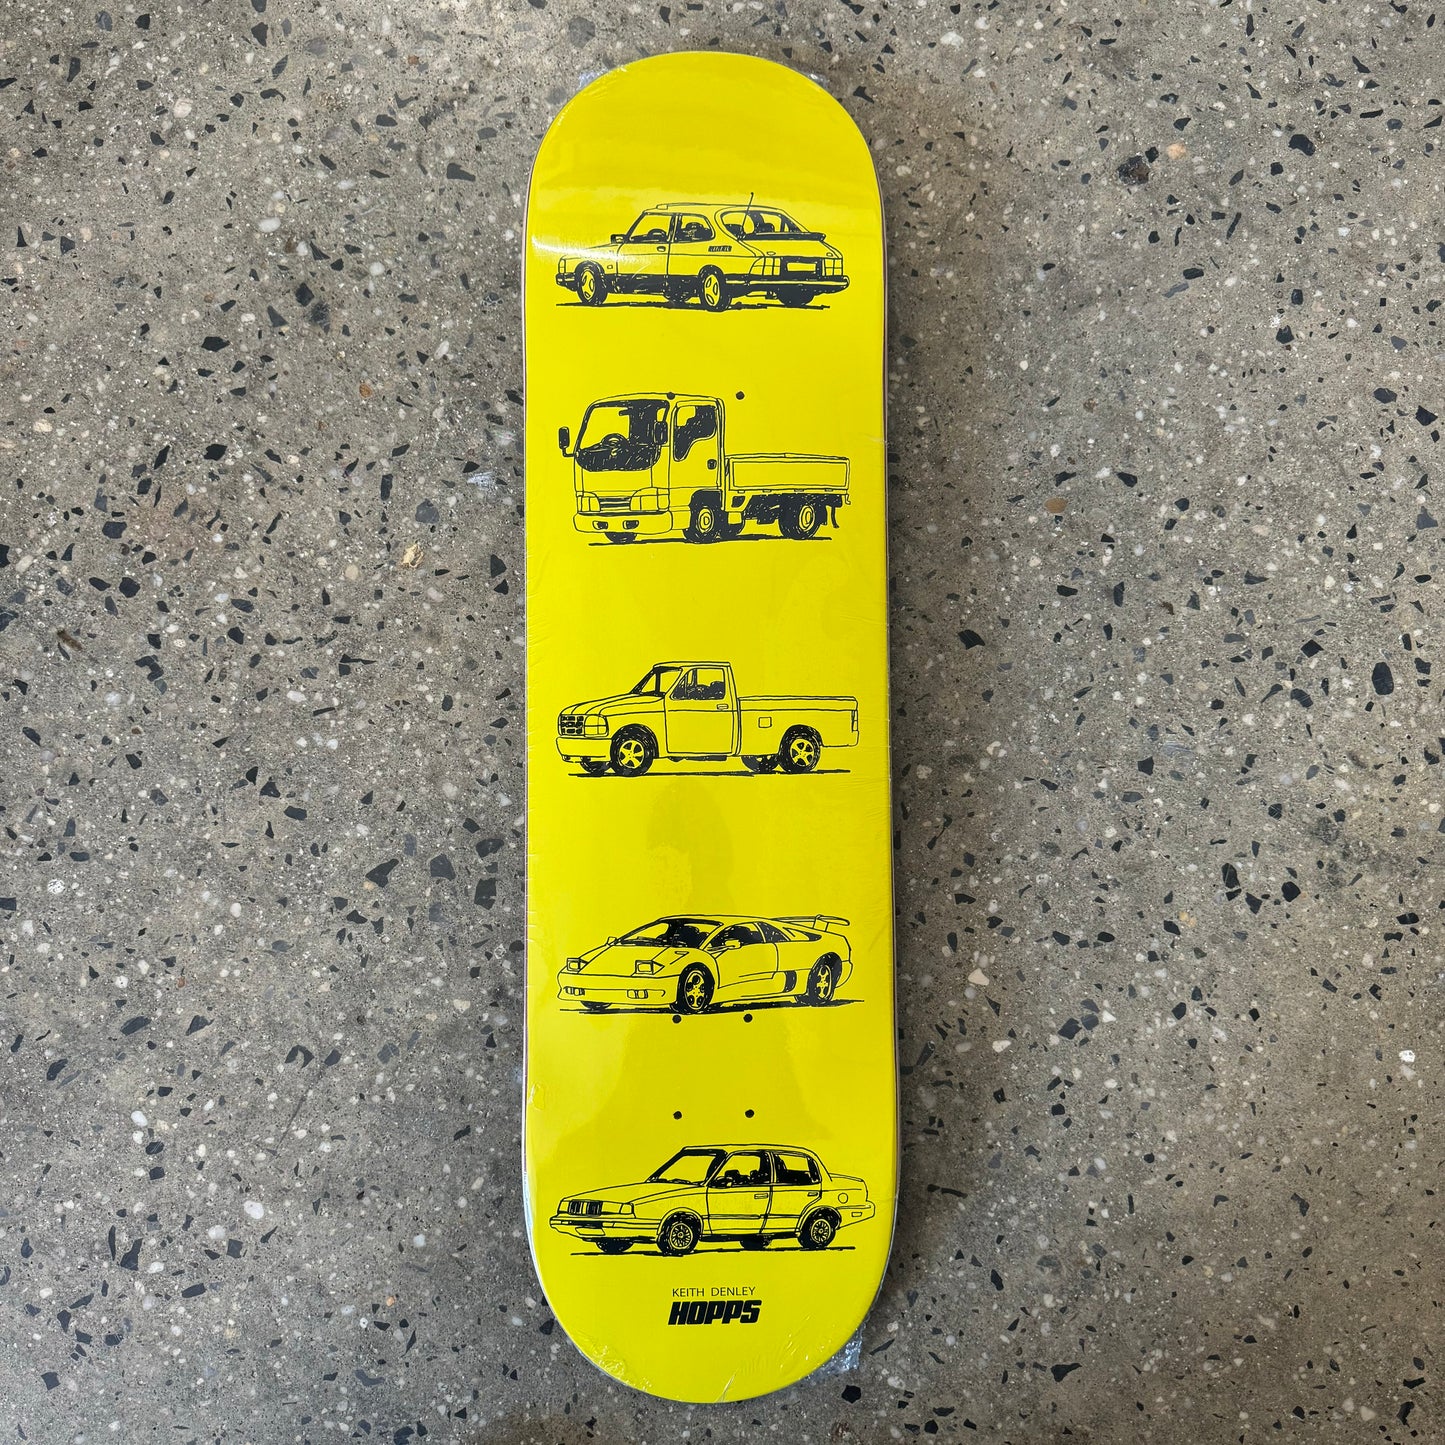 Series of hand drawn automobiles printed on yellow skate deck